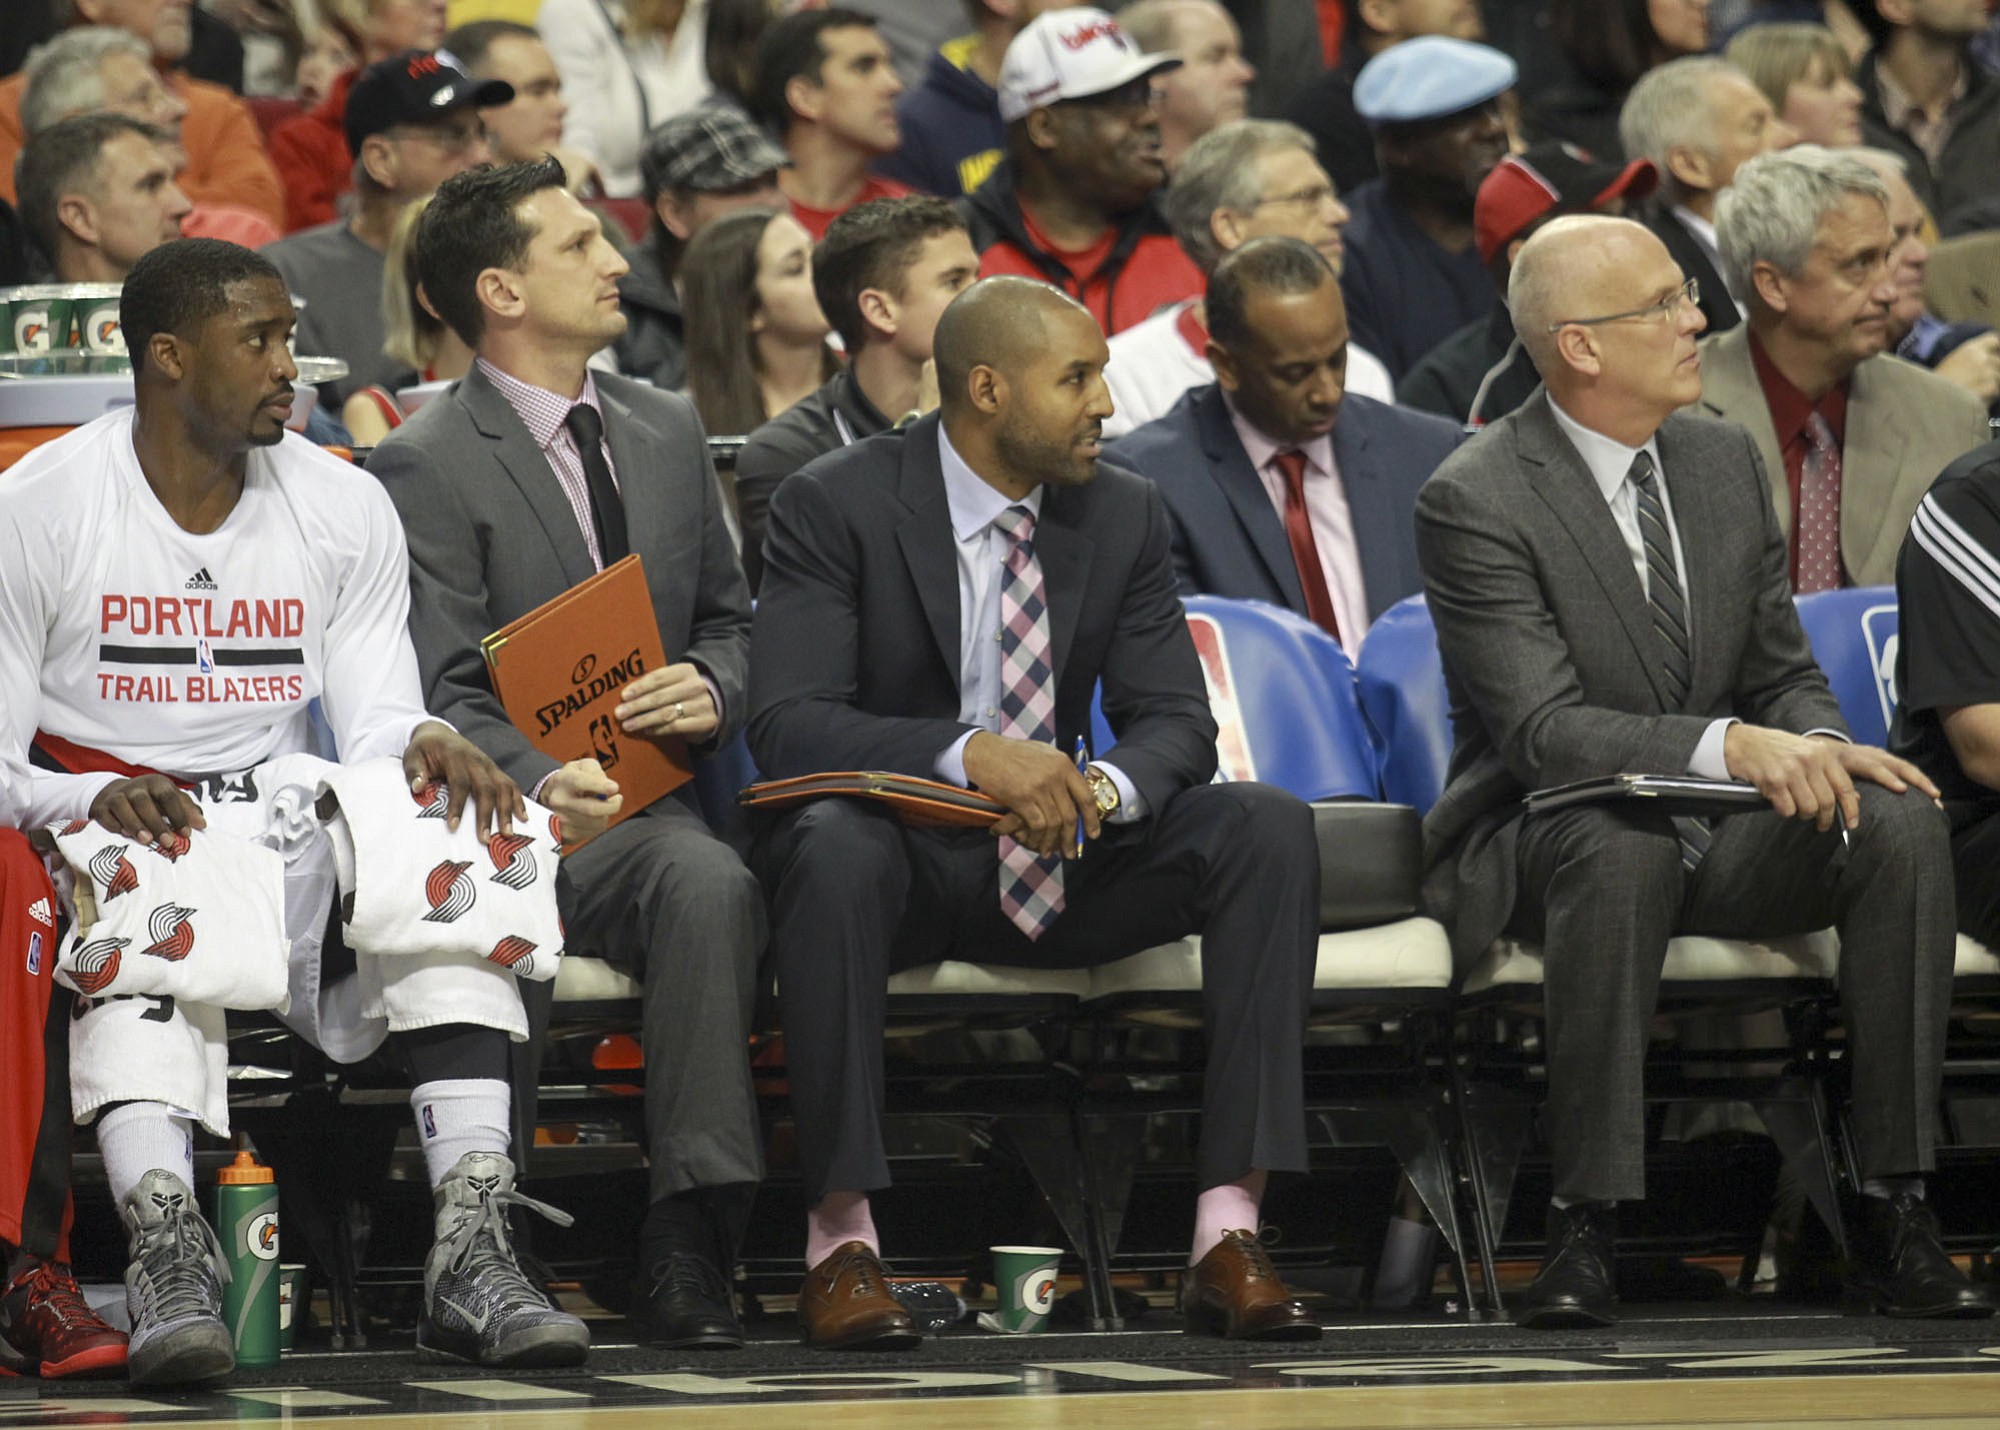 Portland Trail Blazers assistant coaches during a game at the Moda Center in Portland on Wednesday, January 14, 2015.